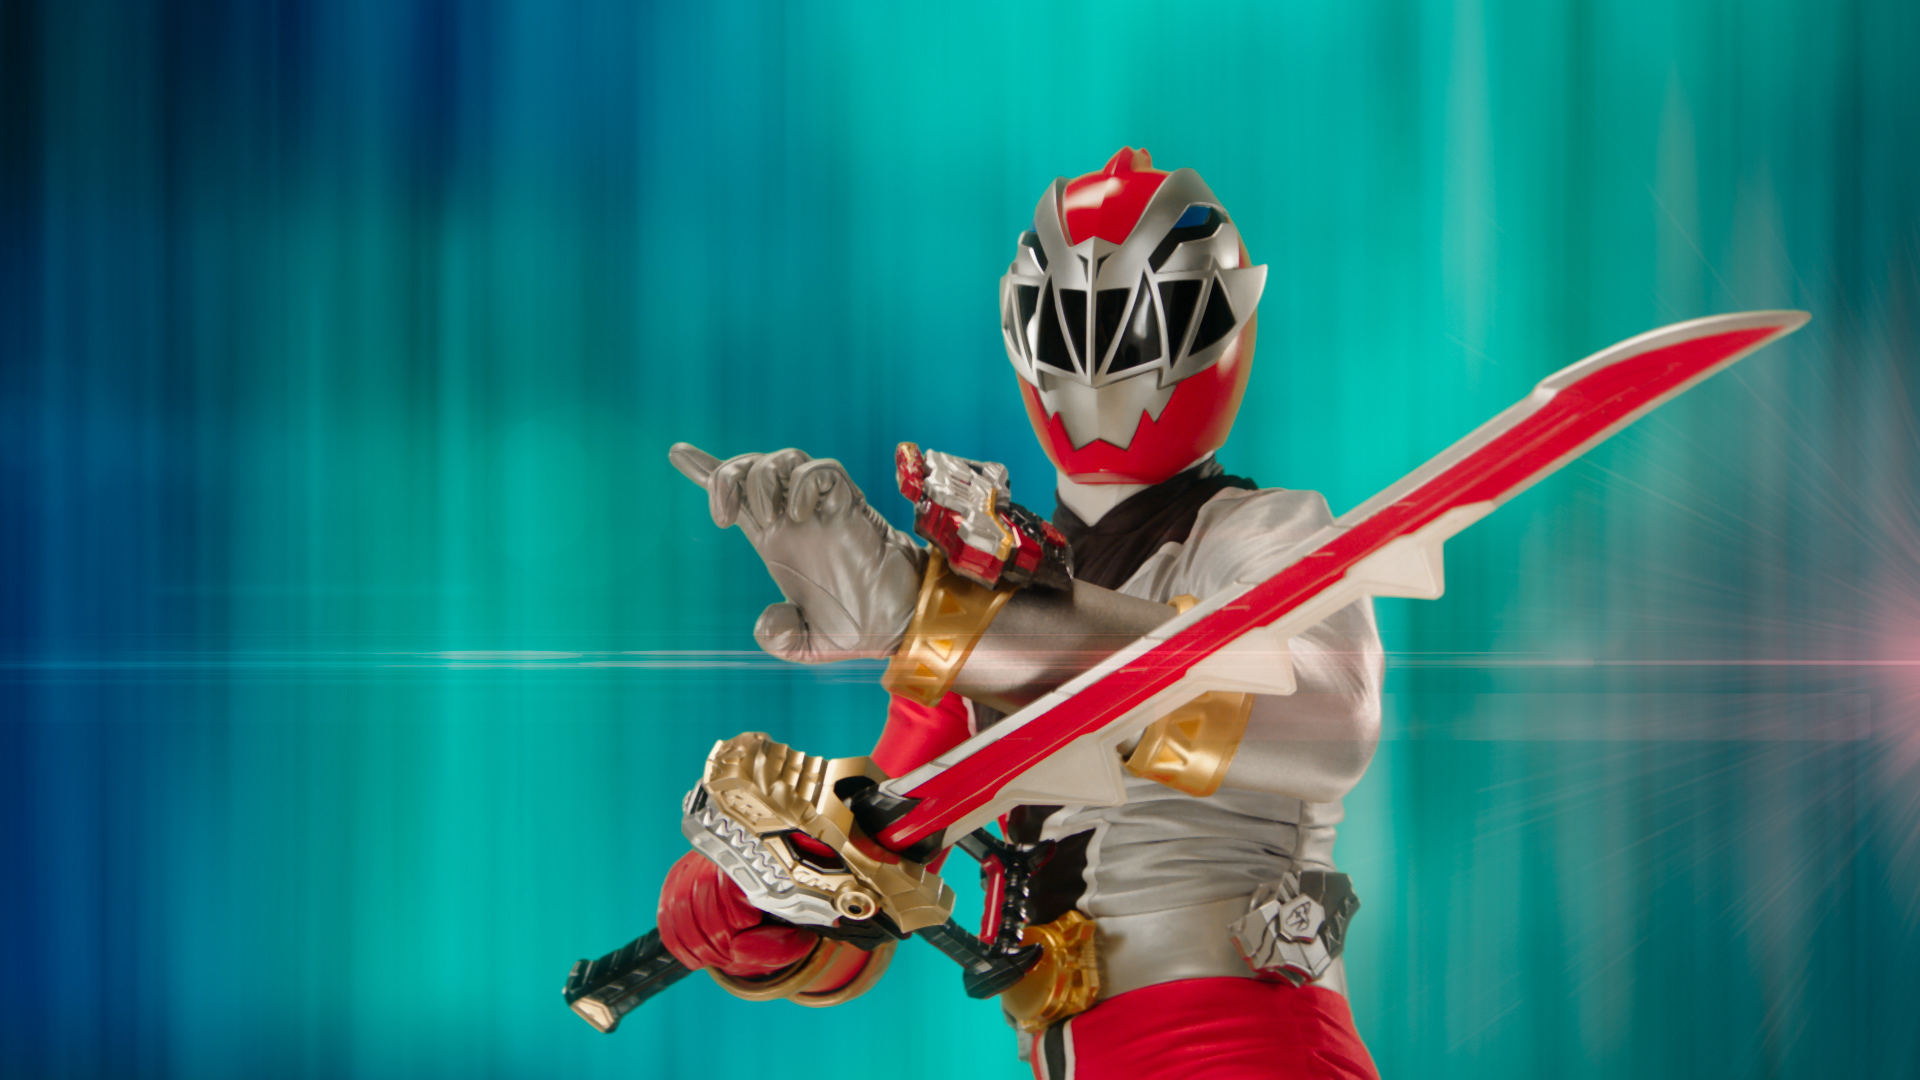 Power Rangers: Dino Fury episode 2 will see Sporix Unleashed